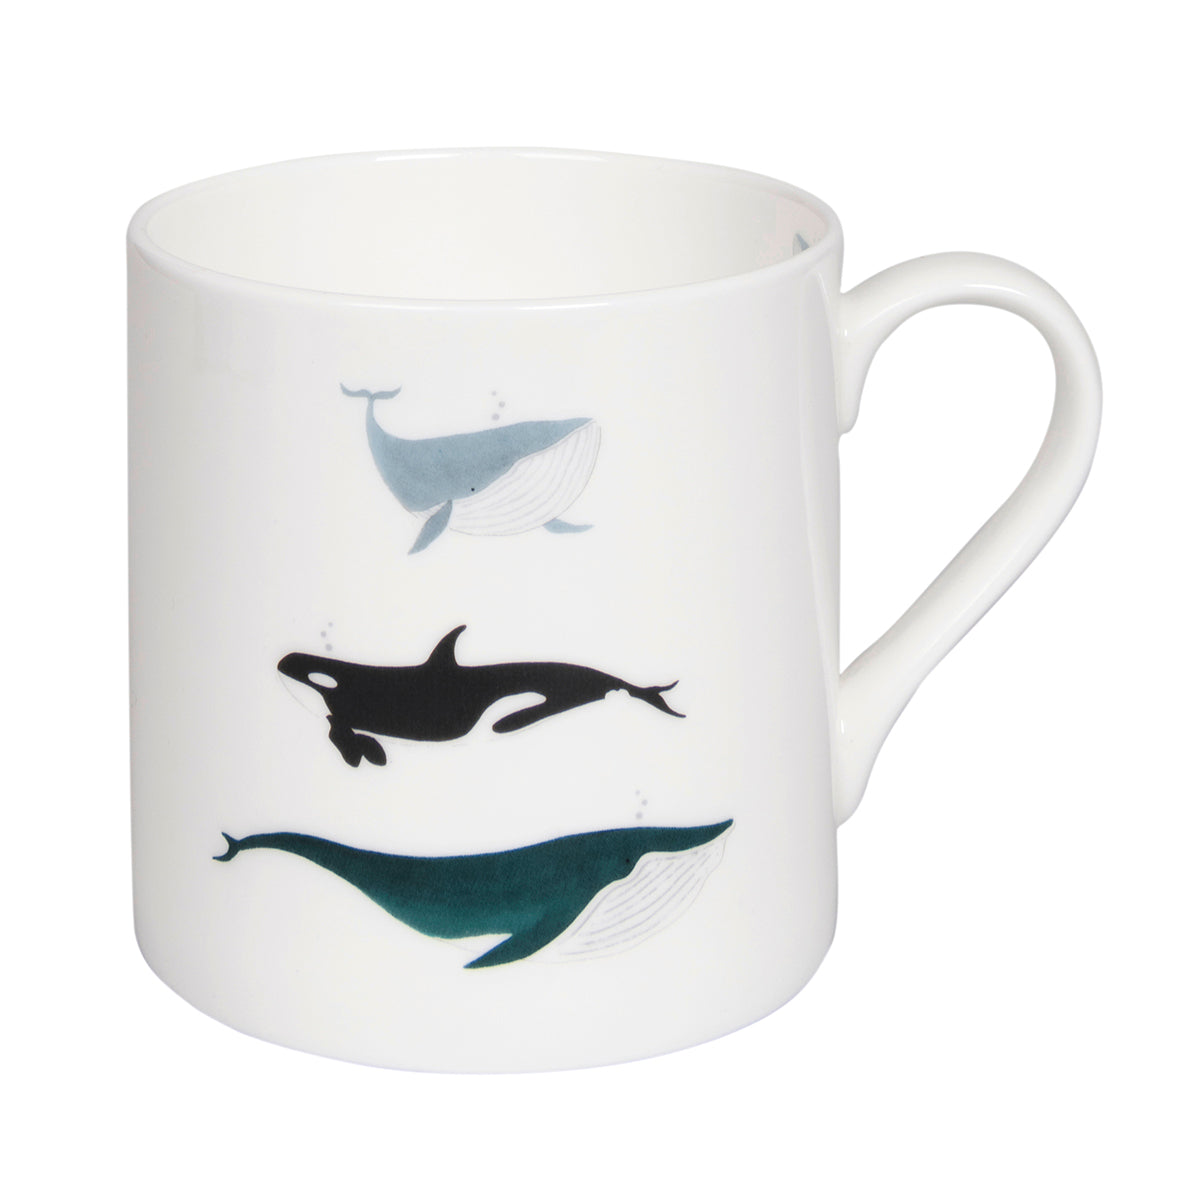 Whales Solo Fine Bone China Mug by Sophie Allport